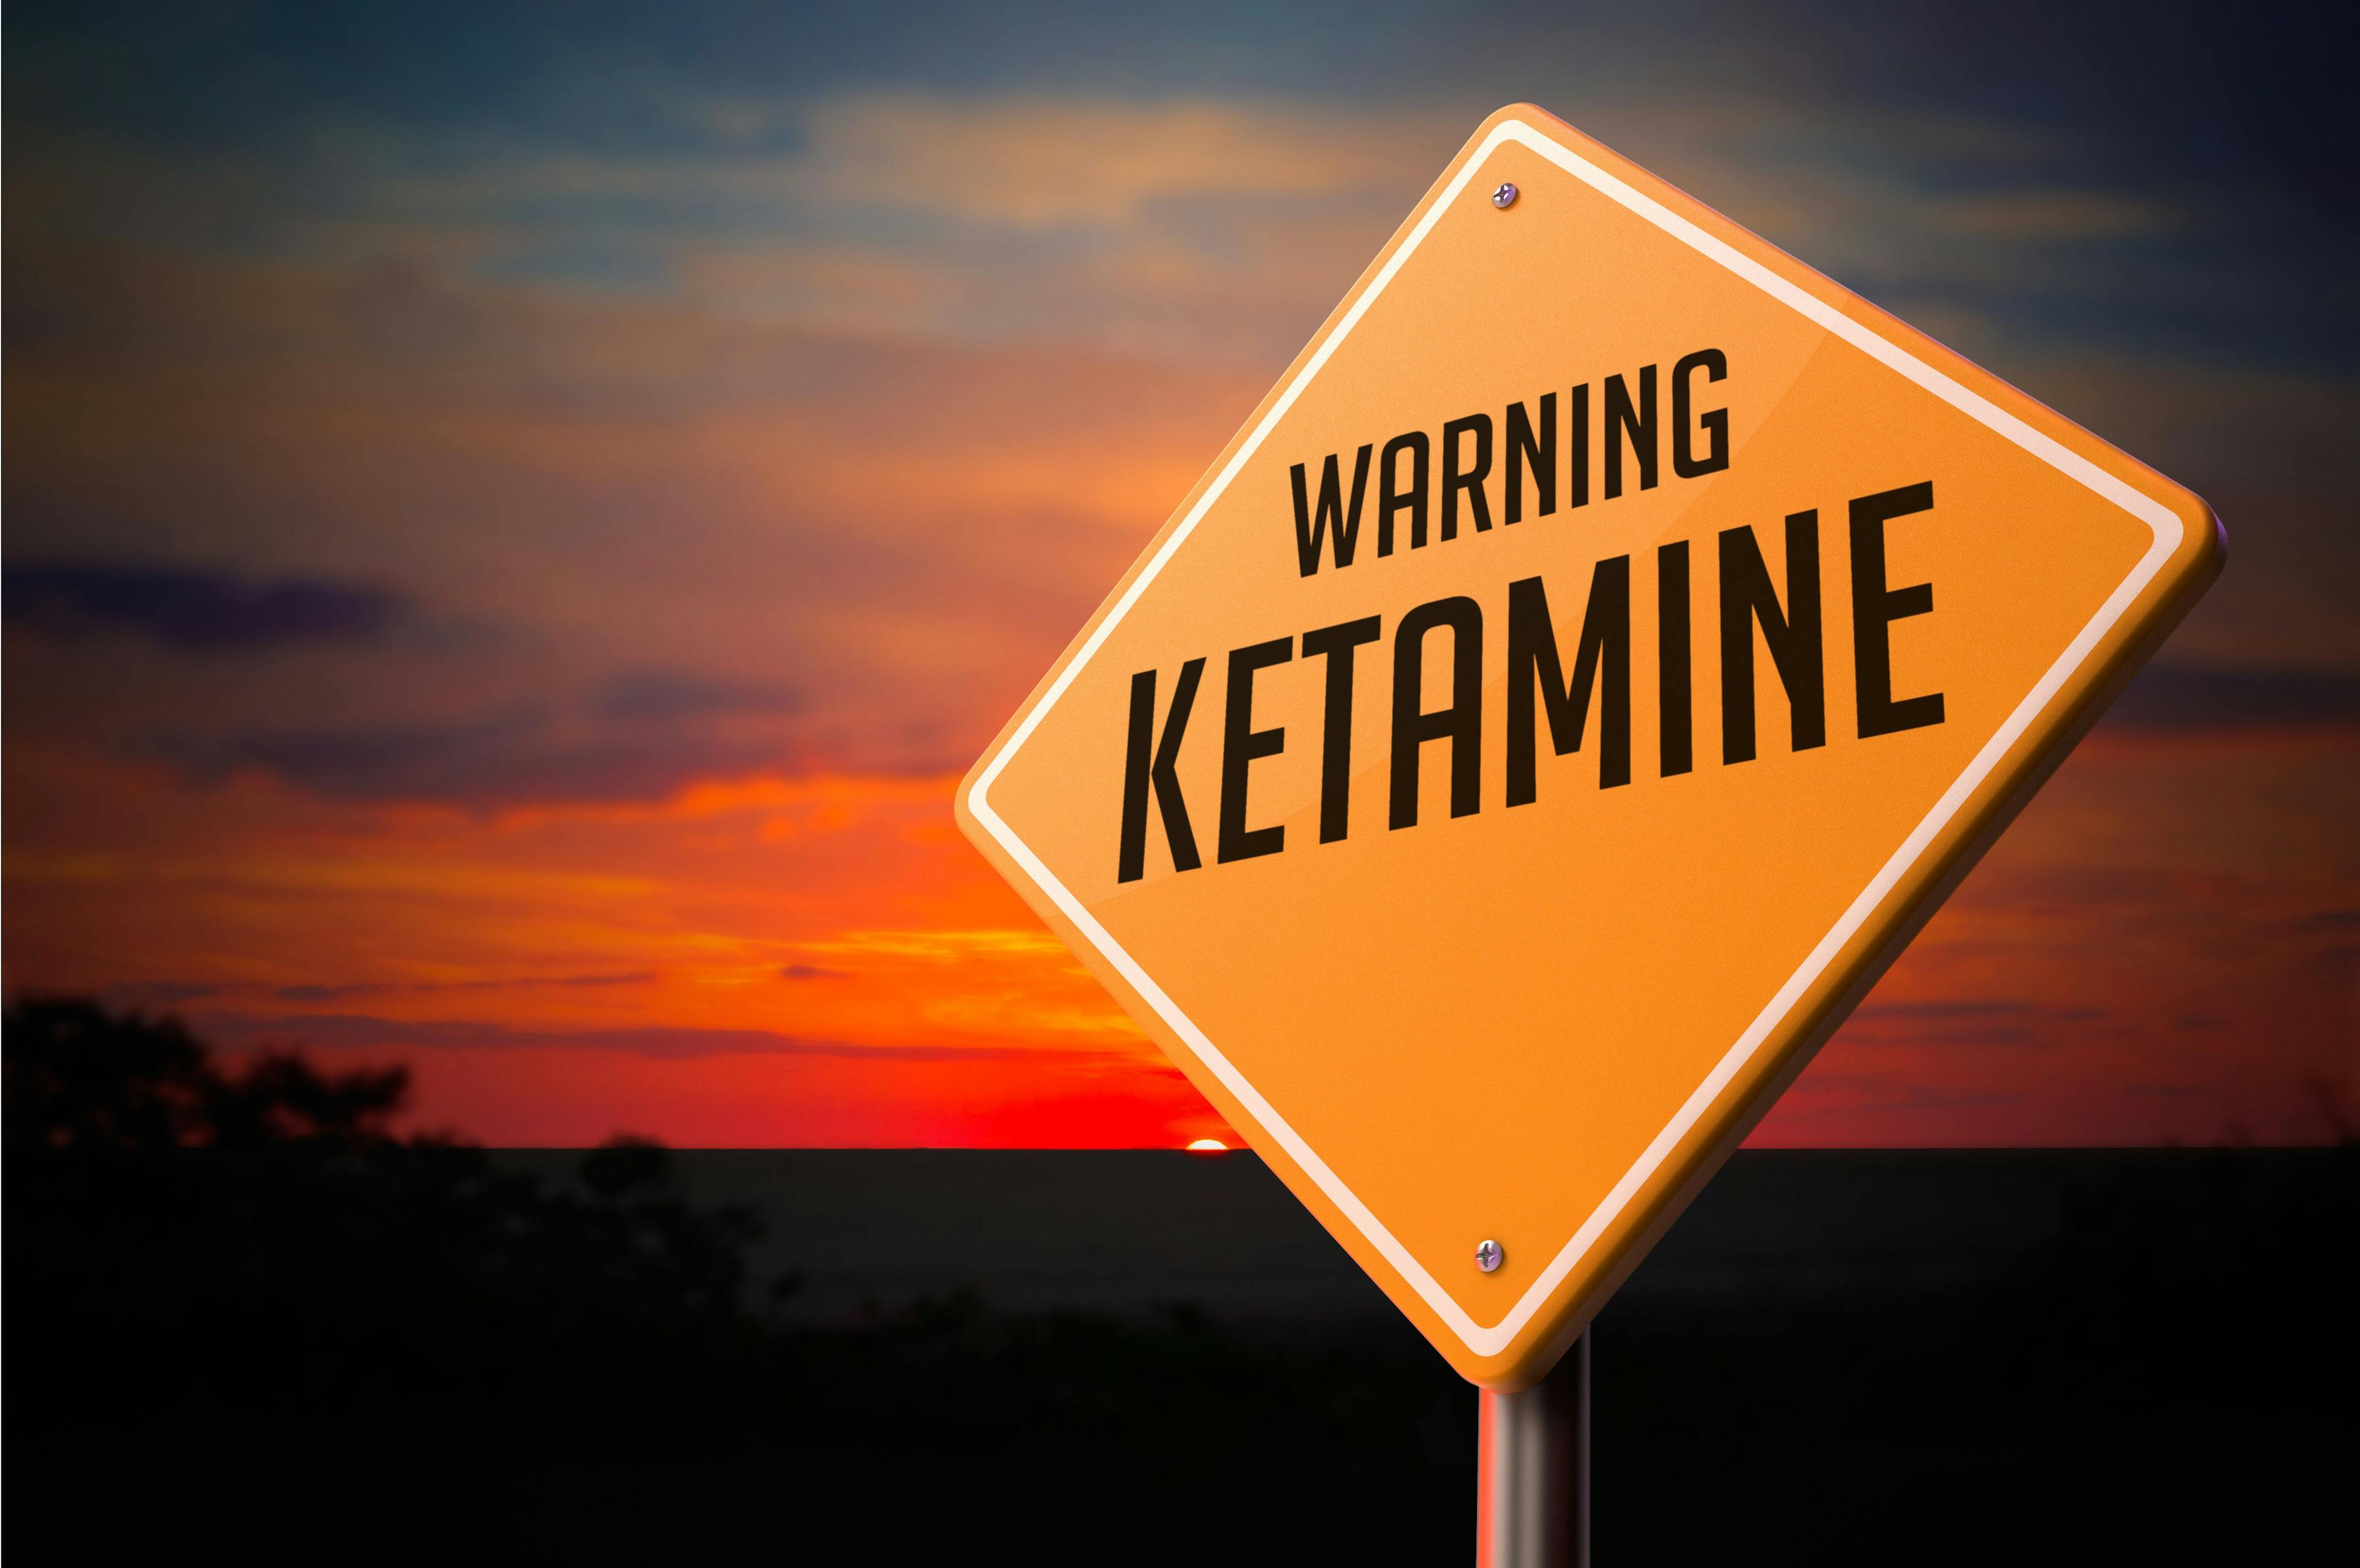 Report Reveals More Than 50% of Americans Misuse At-Home Ketamine 